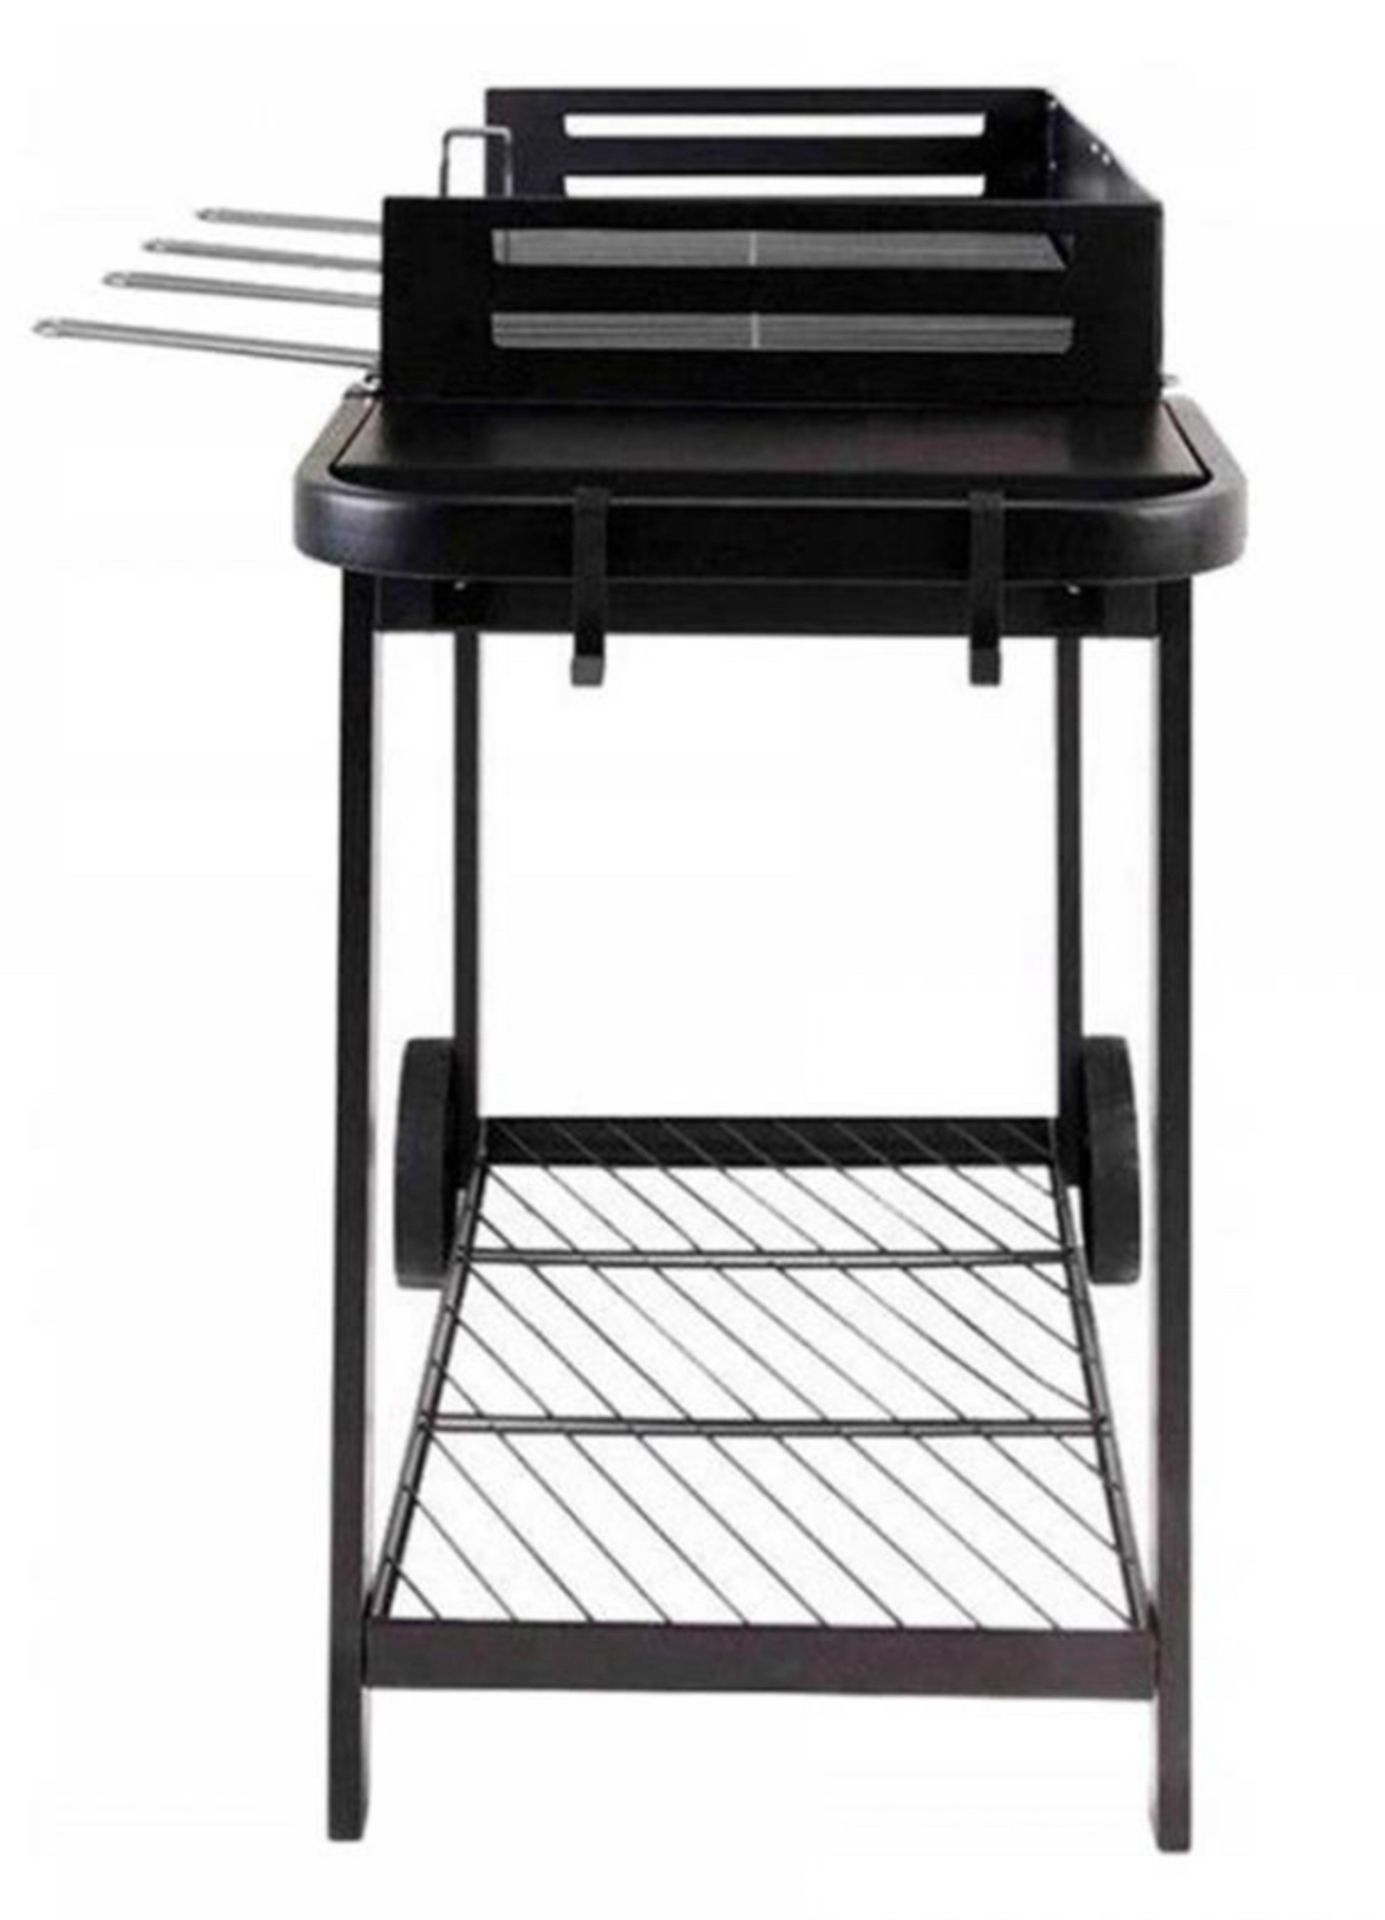 Zelfo BBQ Barbecue Grill with Stands - Brand New & Boxed - NO VAT! - Image 4 of 7